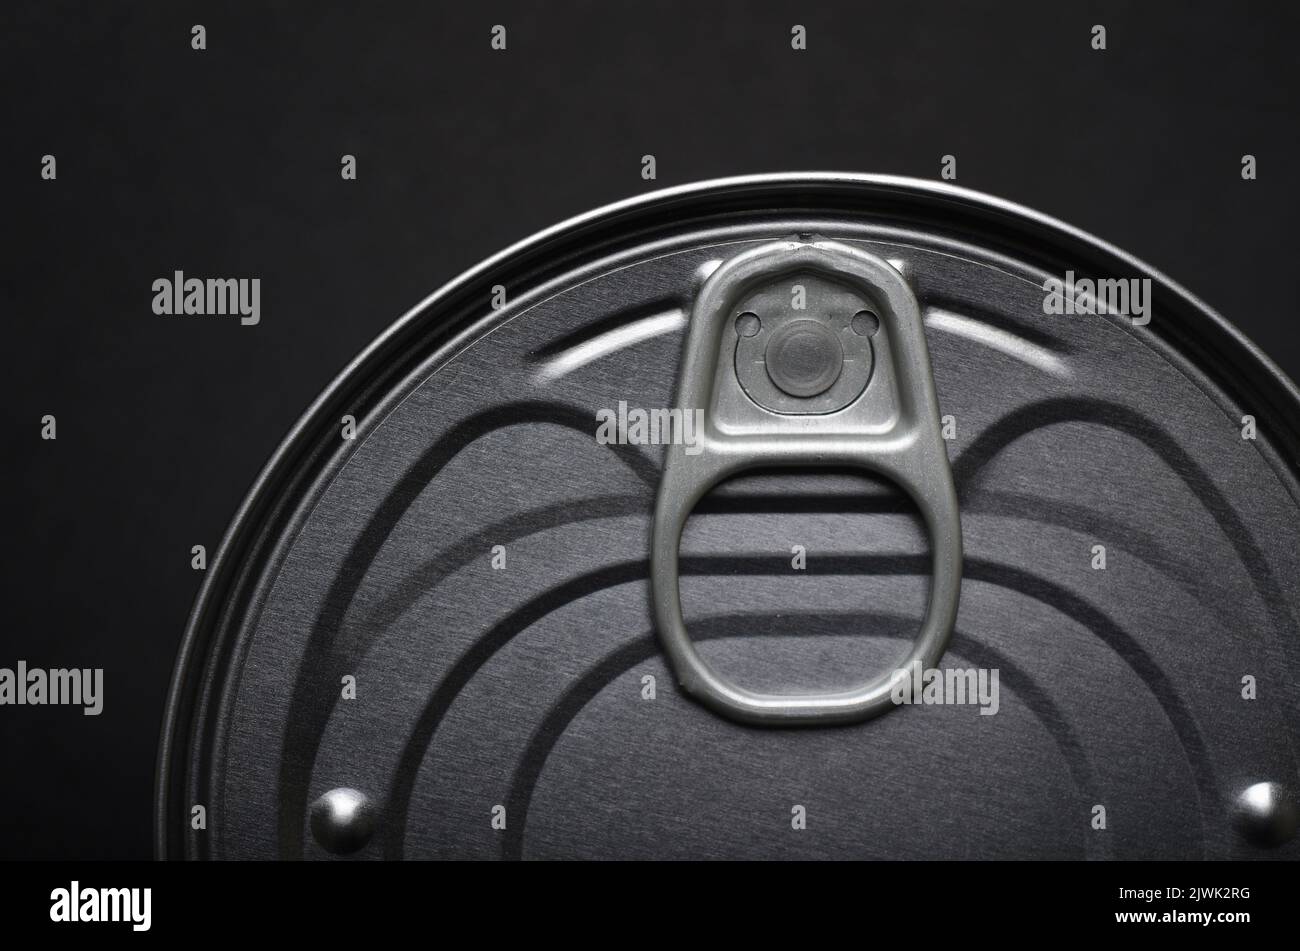 Top of tin can lid showing ring pull opener from above on black background Stock Photo